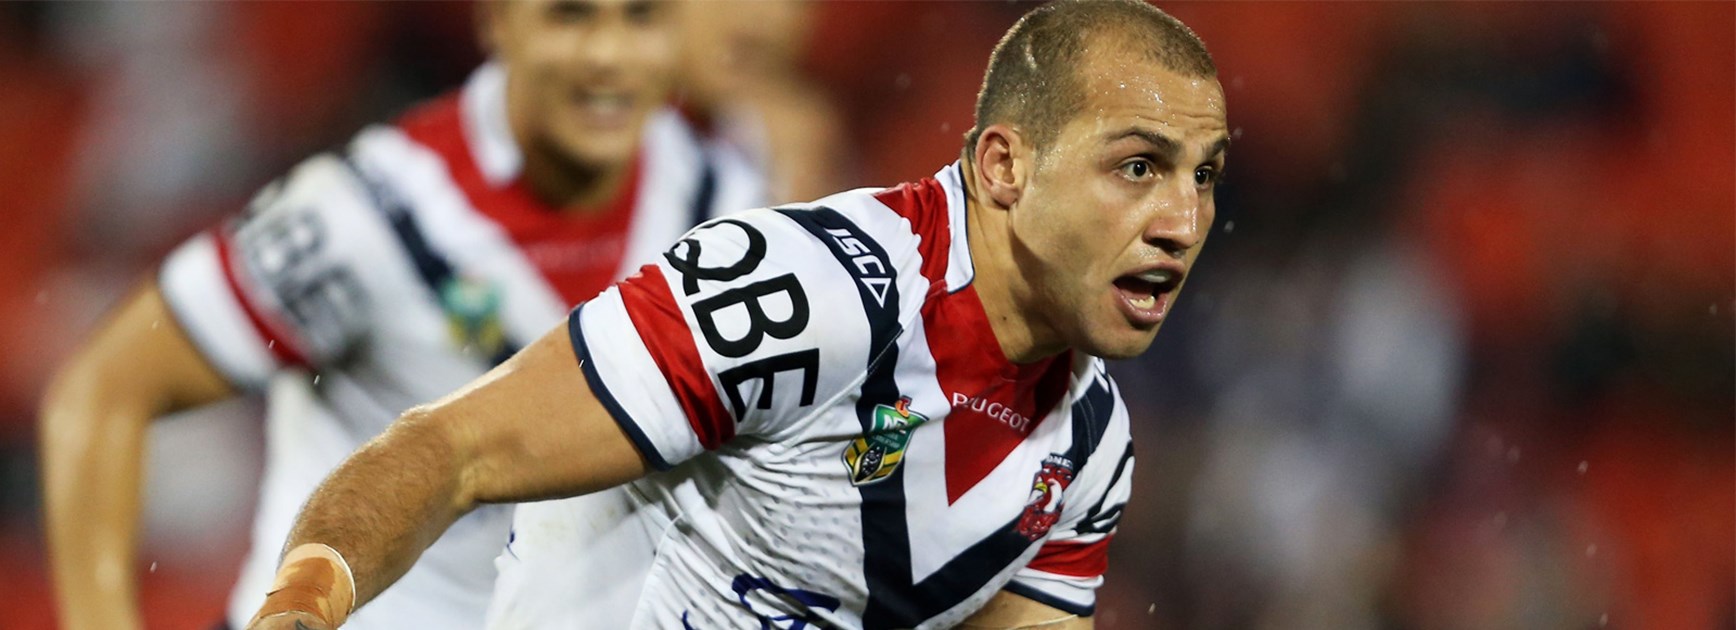 Blake Ferguson is forming a terrific right-side combination with Shaun Kenny-Dowall.